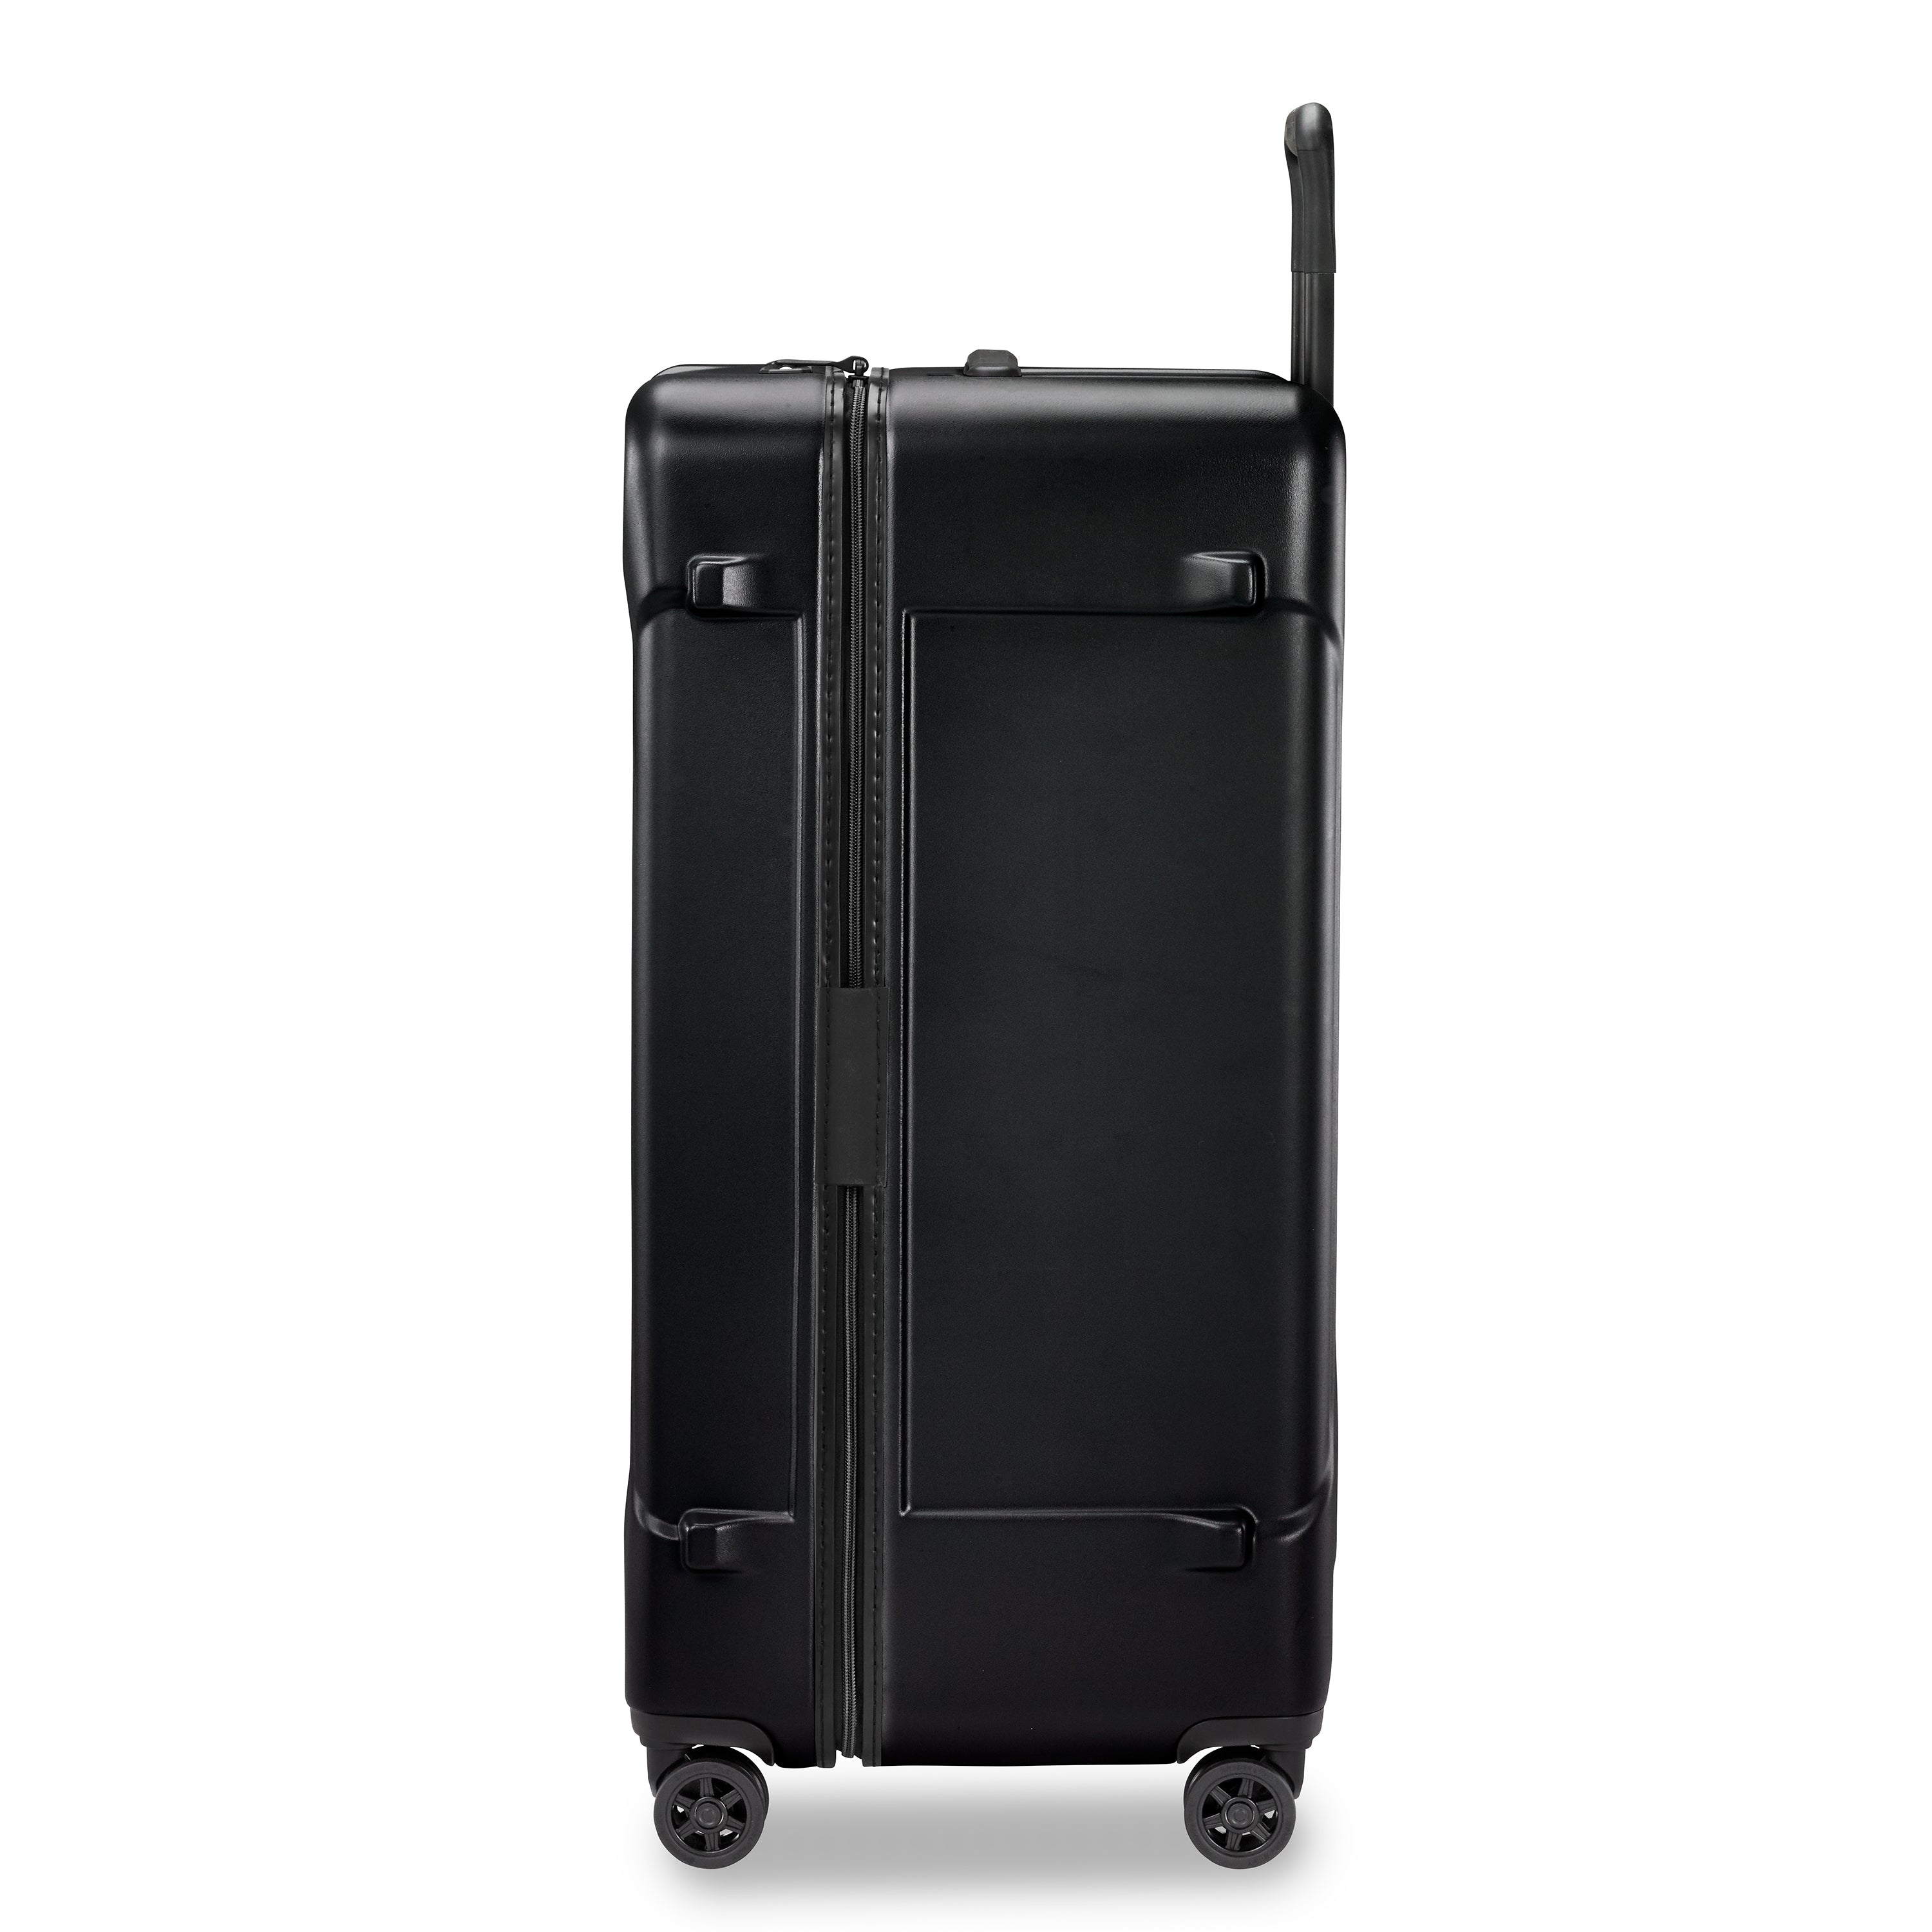 Briggs & Riley Torq Extra Large Trunk Spinner - Stealth